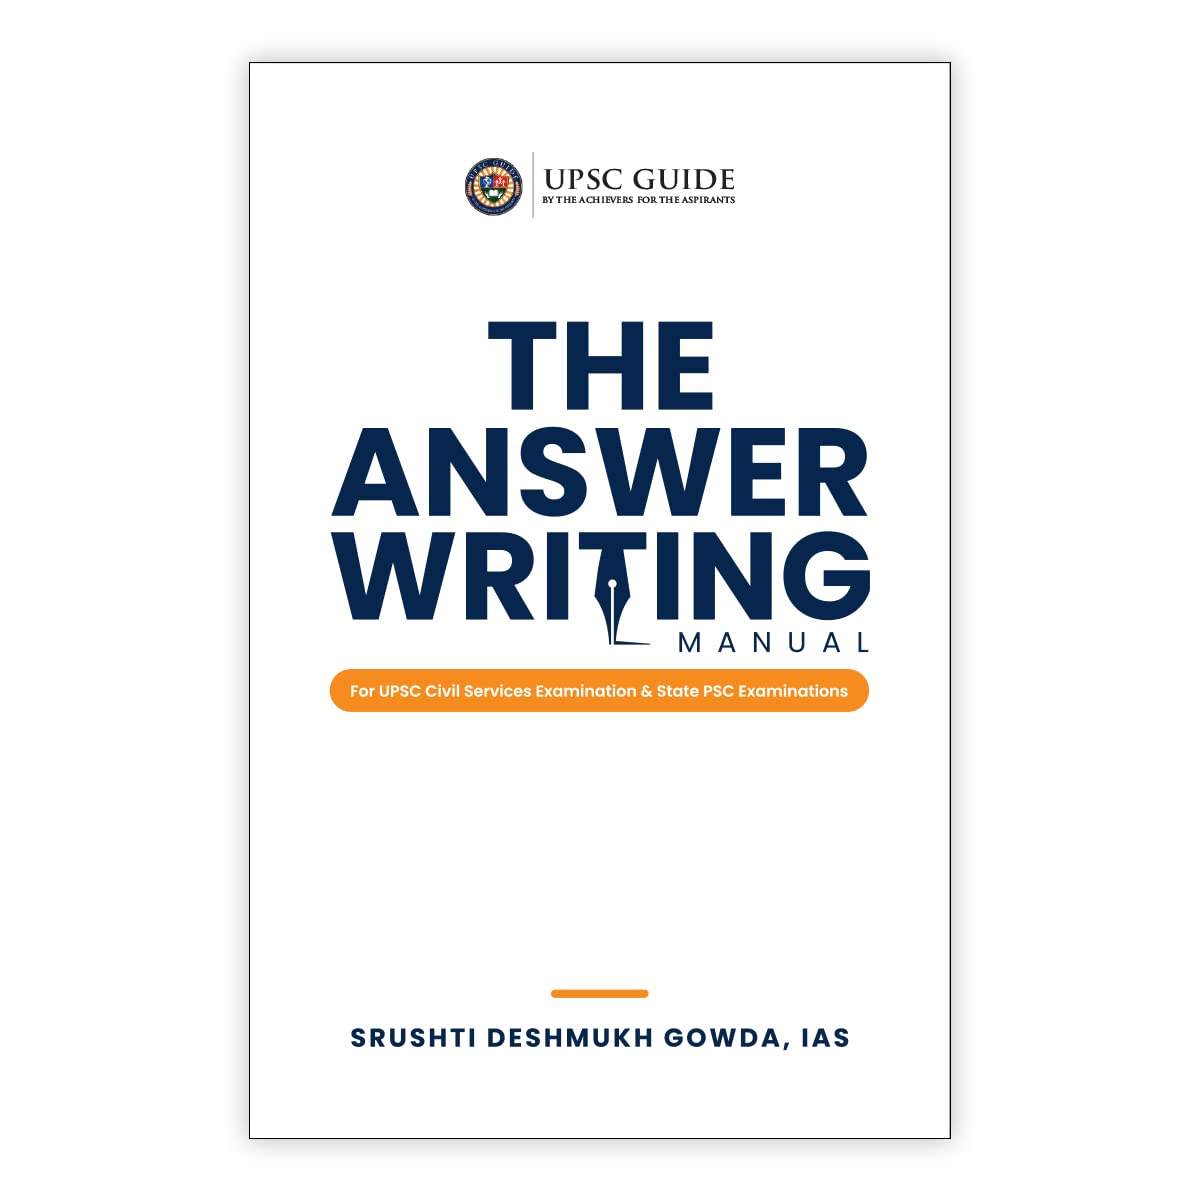 The Answer Writing Manual for UPSC Civil Services & State PSC Examinations by Srushti Deshmukh Gowda IAS